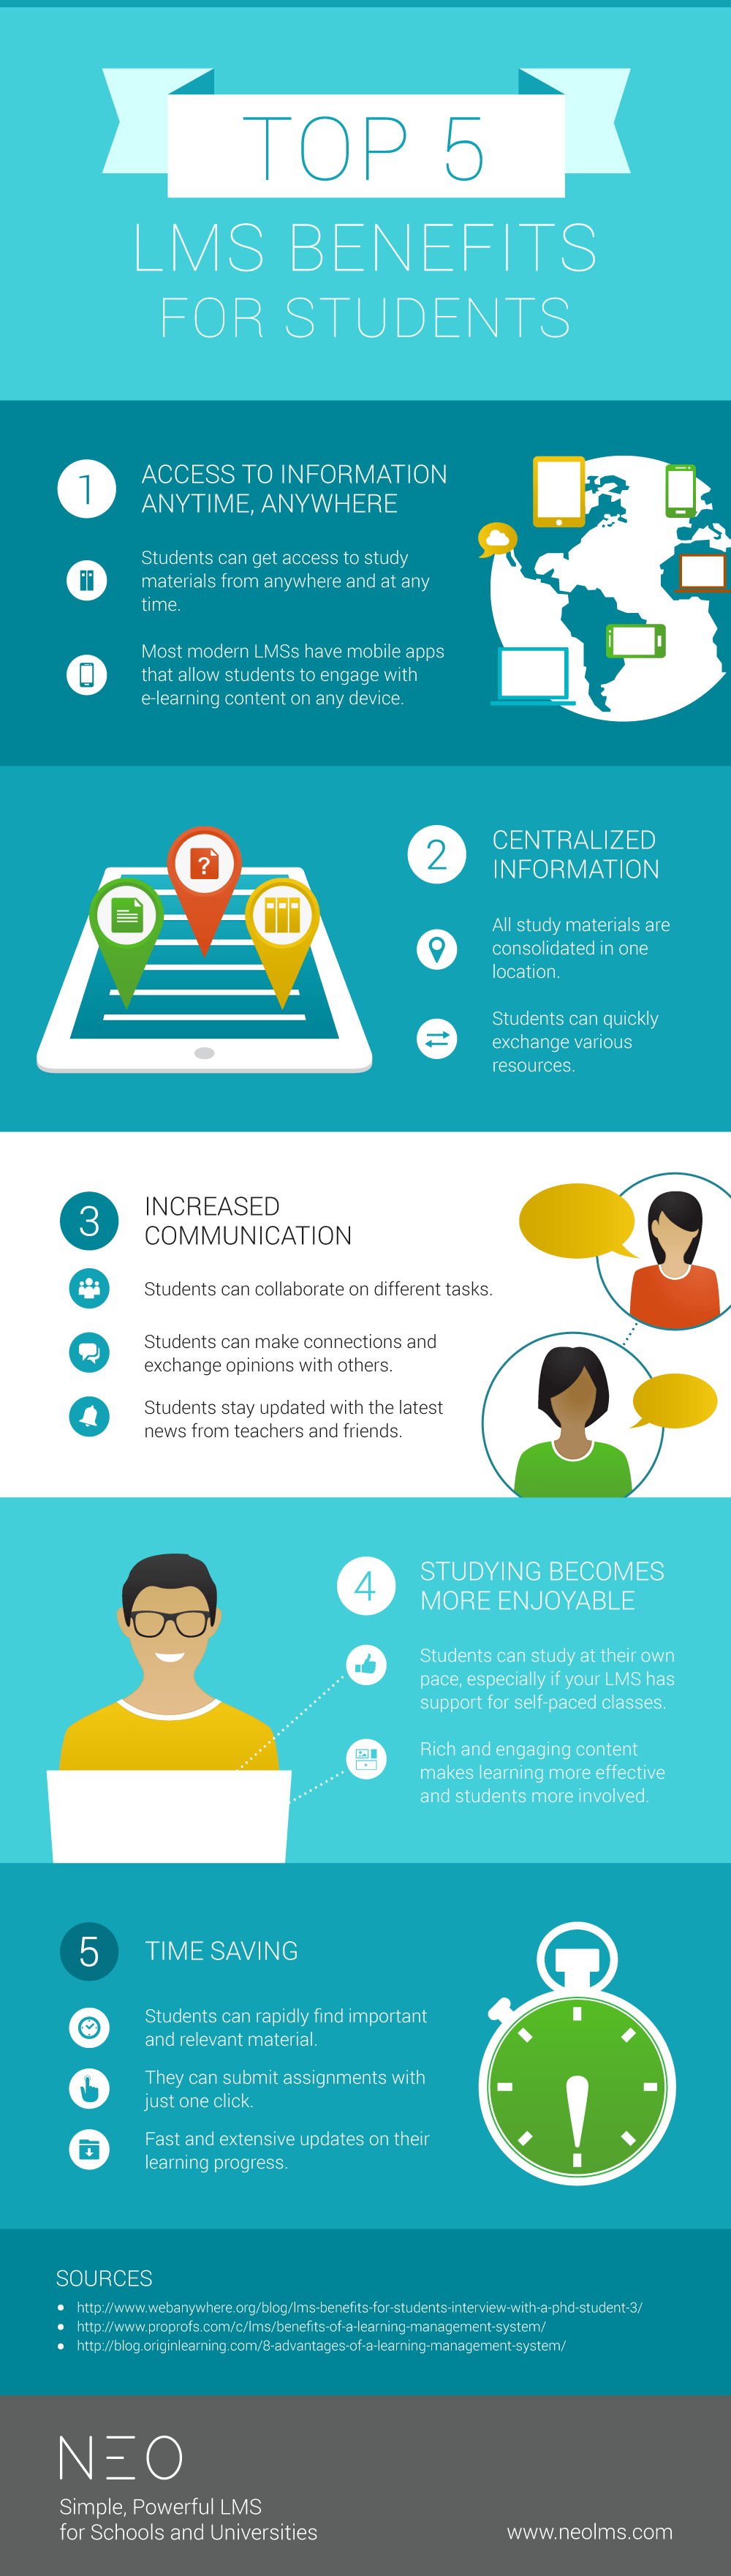 Top 5 LMS Benefits for Students Infographic